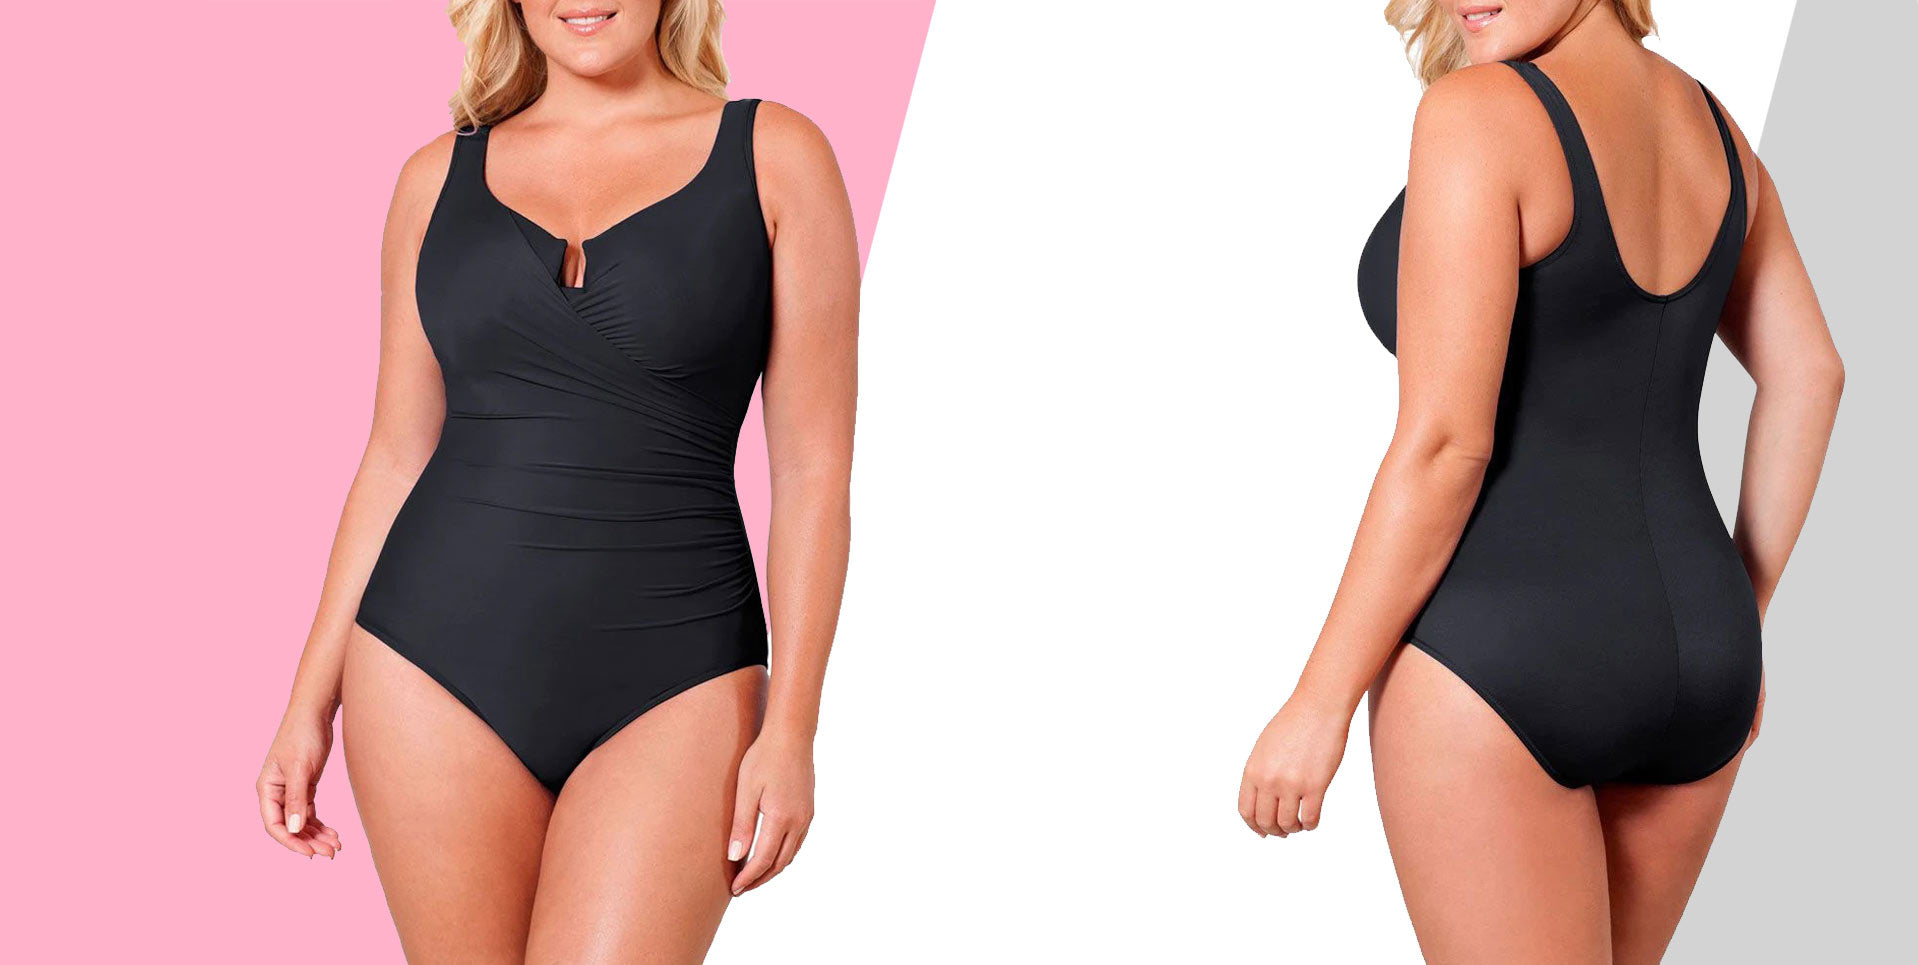 Recommendations and tips for plus size swimwear : Top 7